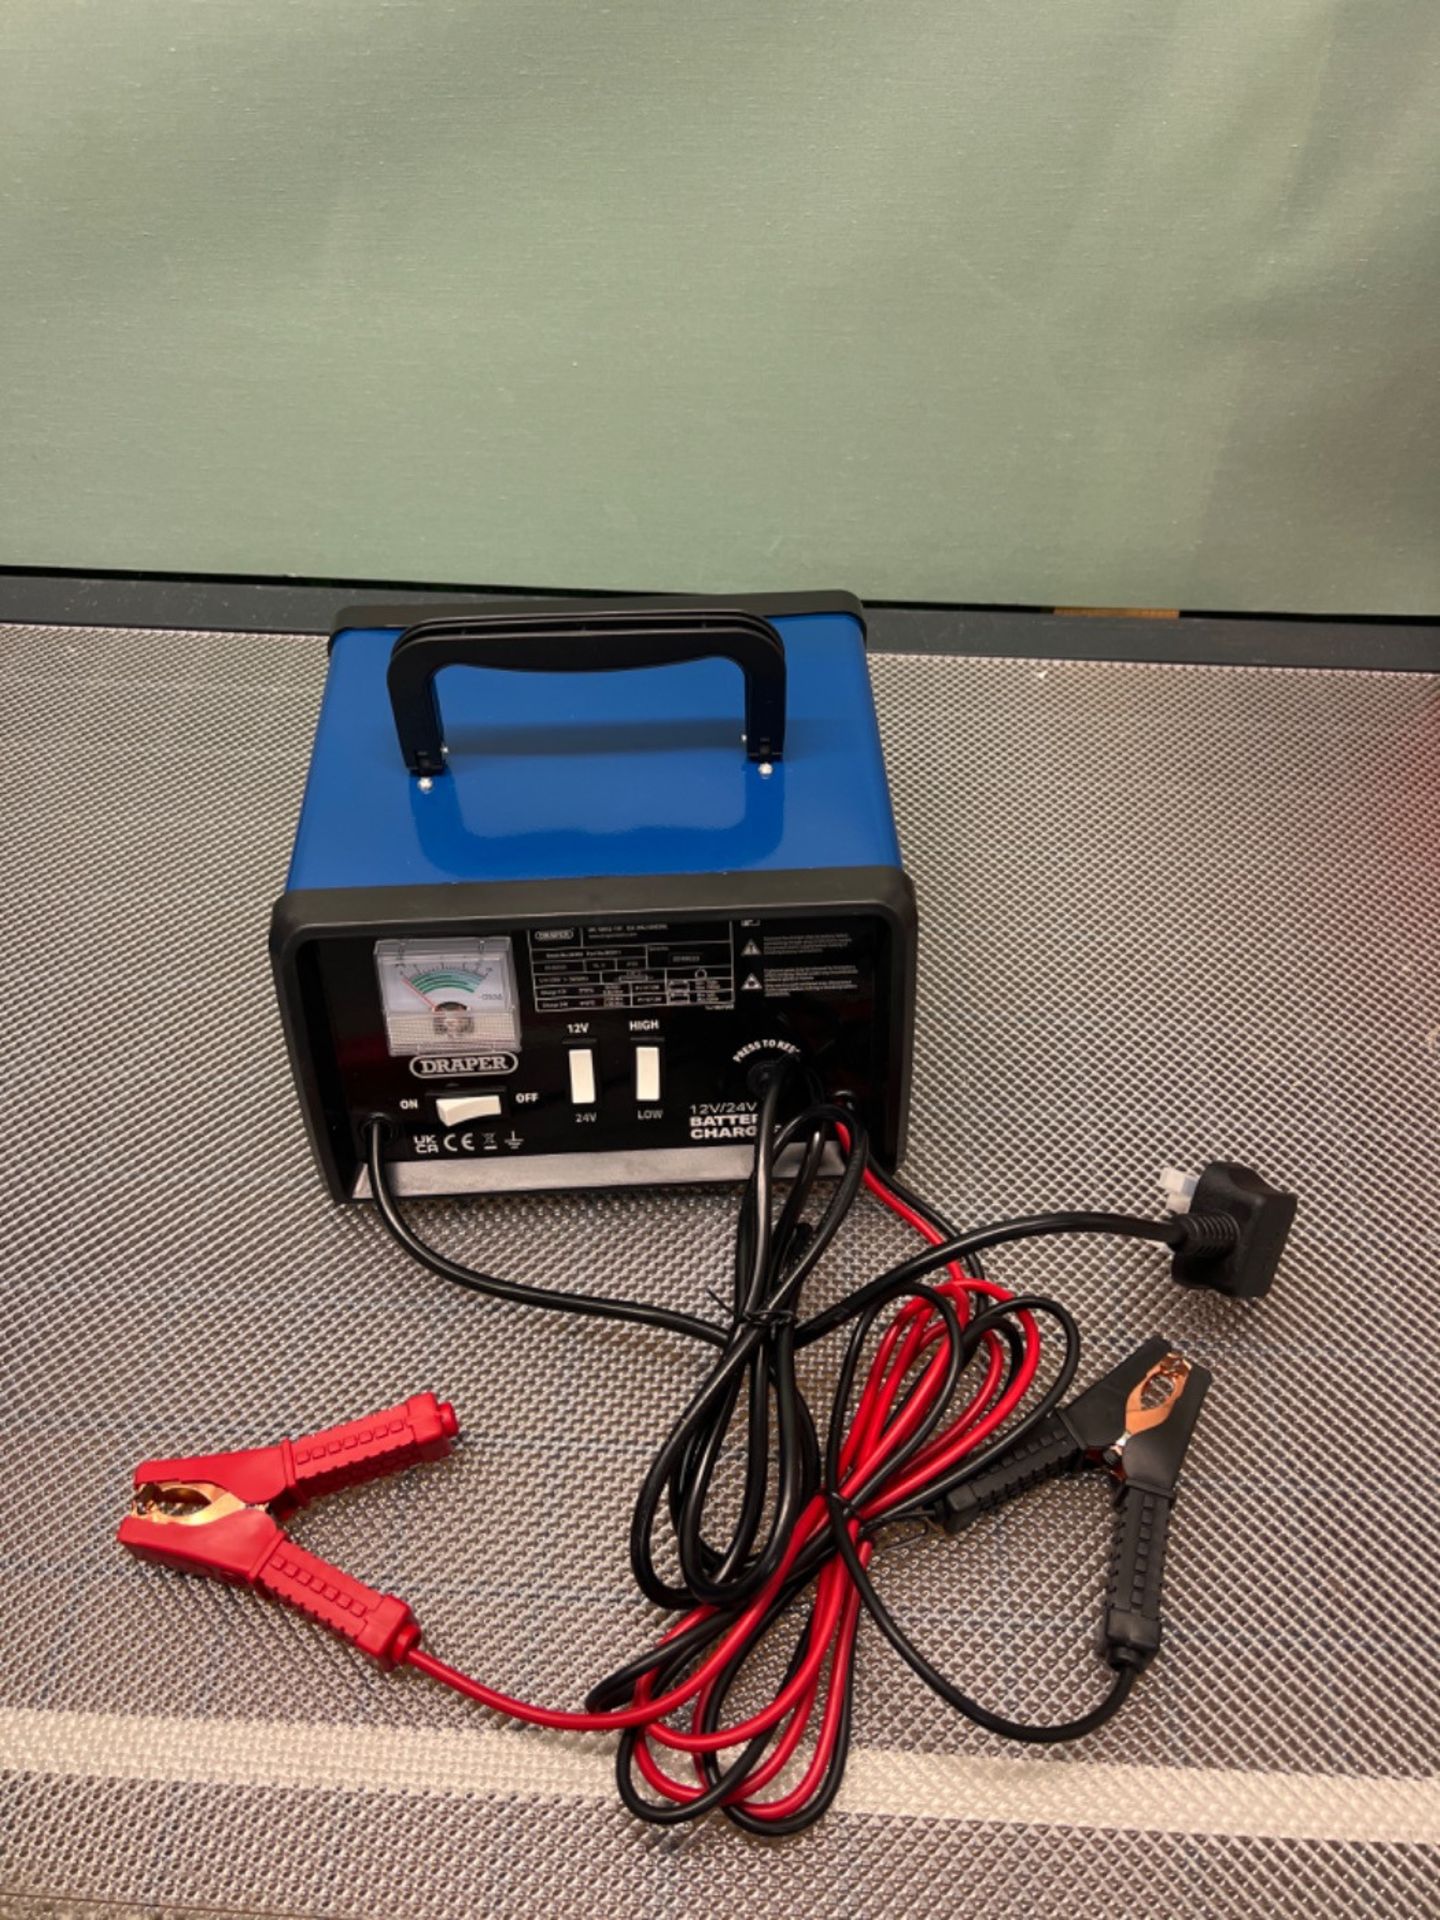 Draper 20493 Battery Charger, 12/24V, 10.3A - Image 2 of 3